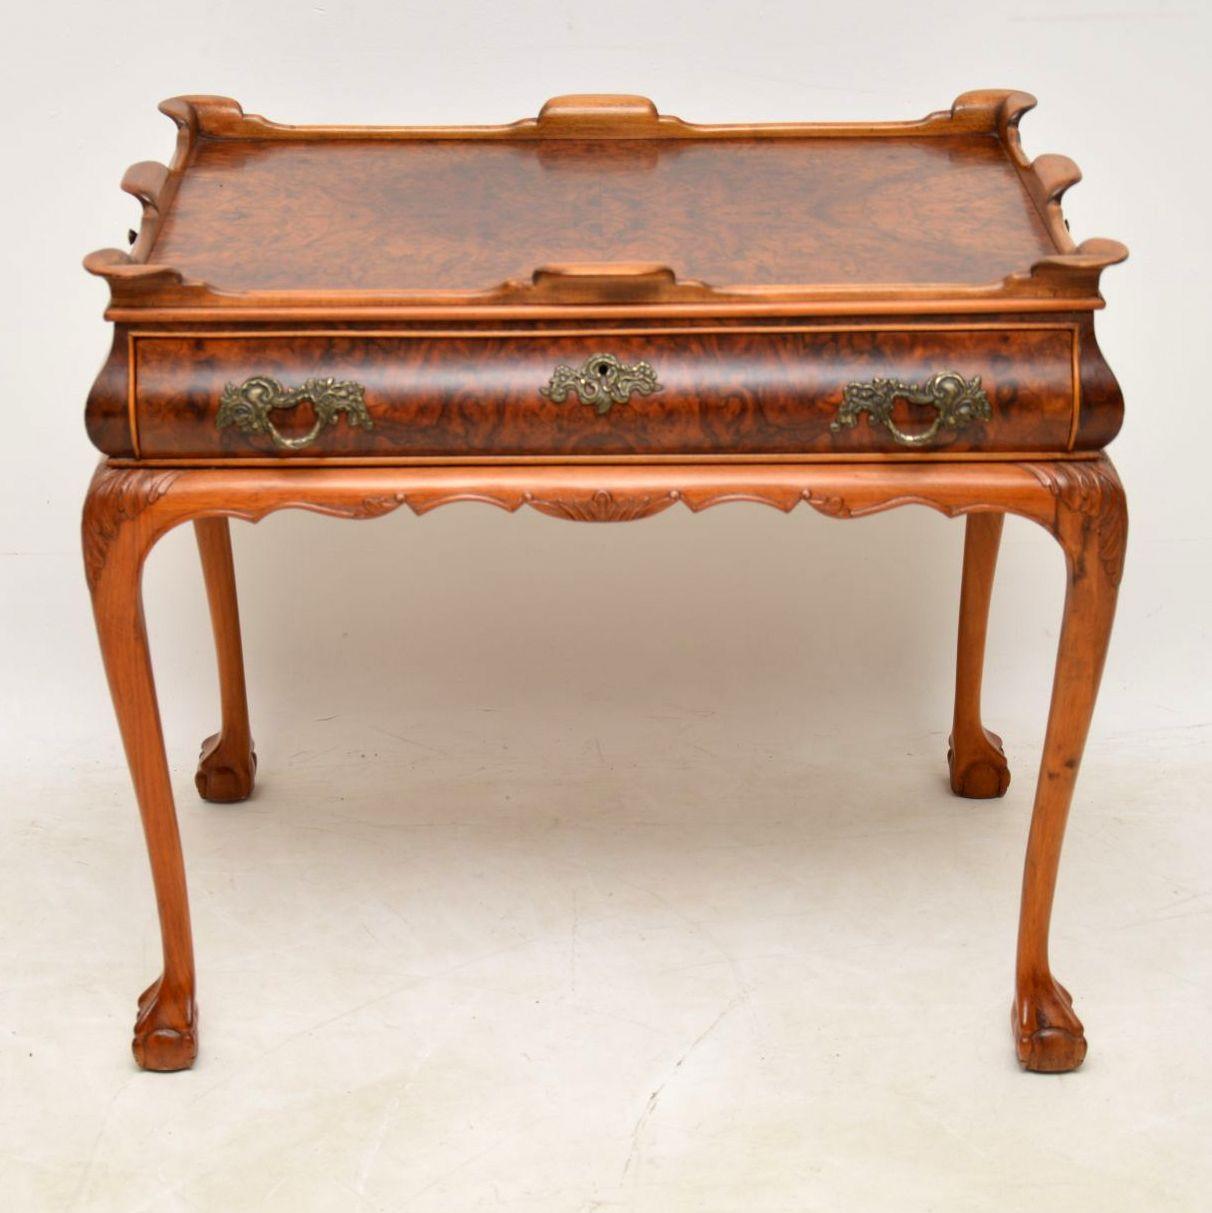 This antique walnut tray top side table is fine quality and has beautiful burr walnut patterns on and around the top. It’s Queen Anne style, dating from circa 1920s period and is in excellent condition. This table has some wonderful features, so